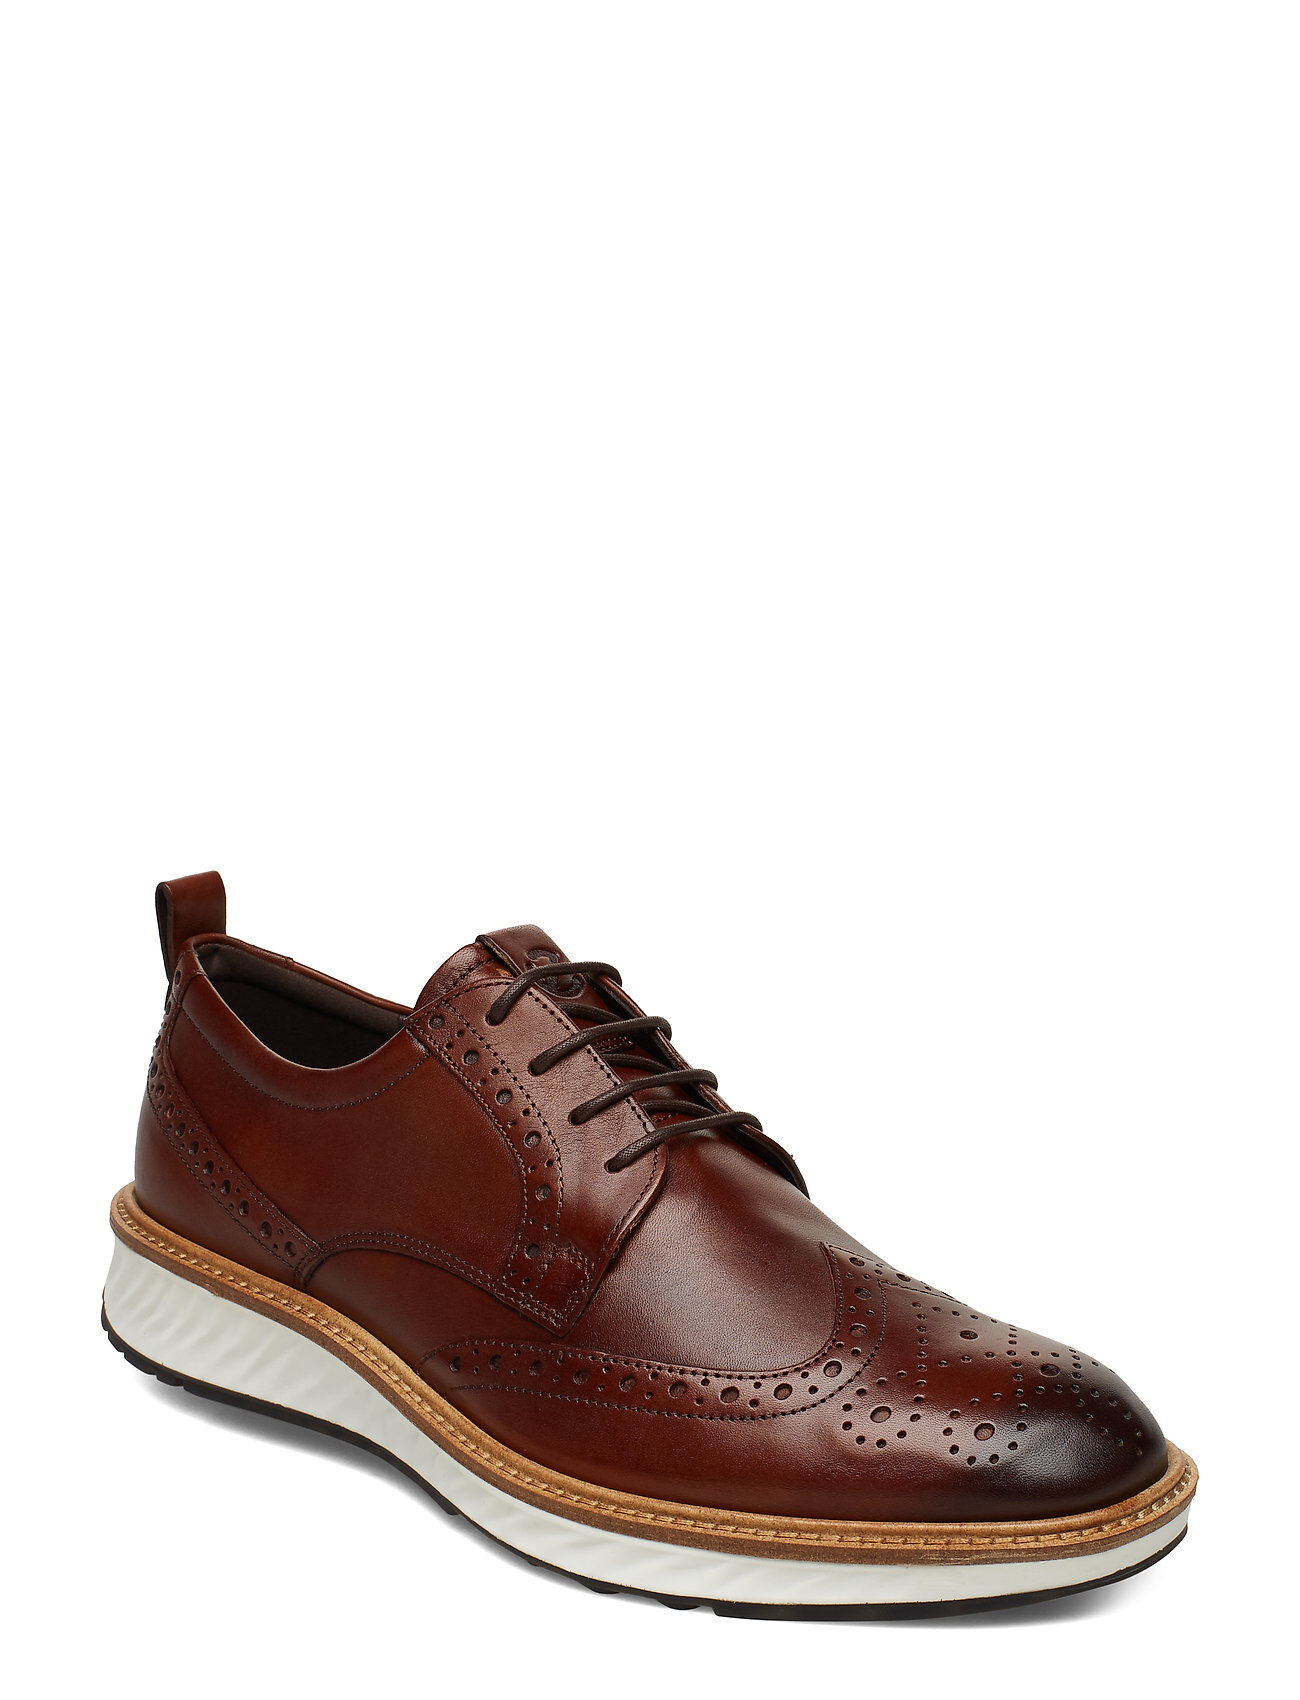 ECCO St.1 Hybrid Shoes Business Brogues Brun ECCO